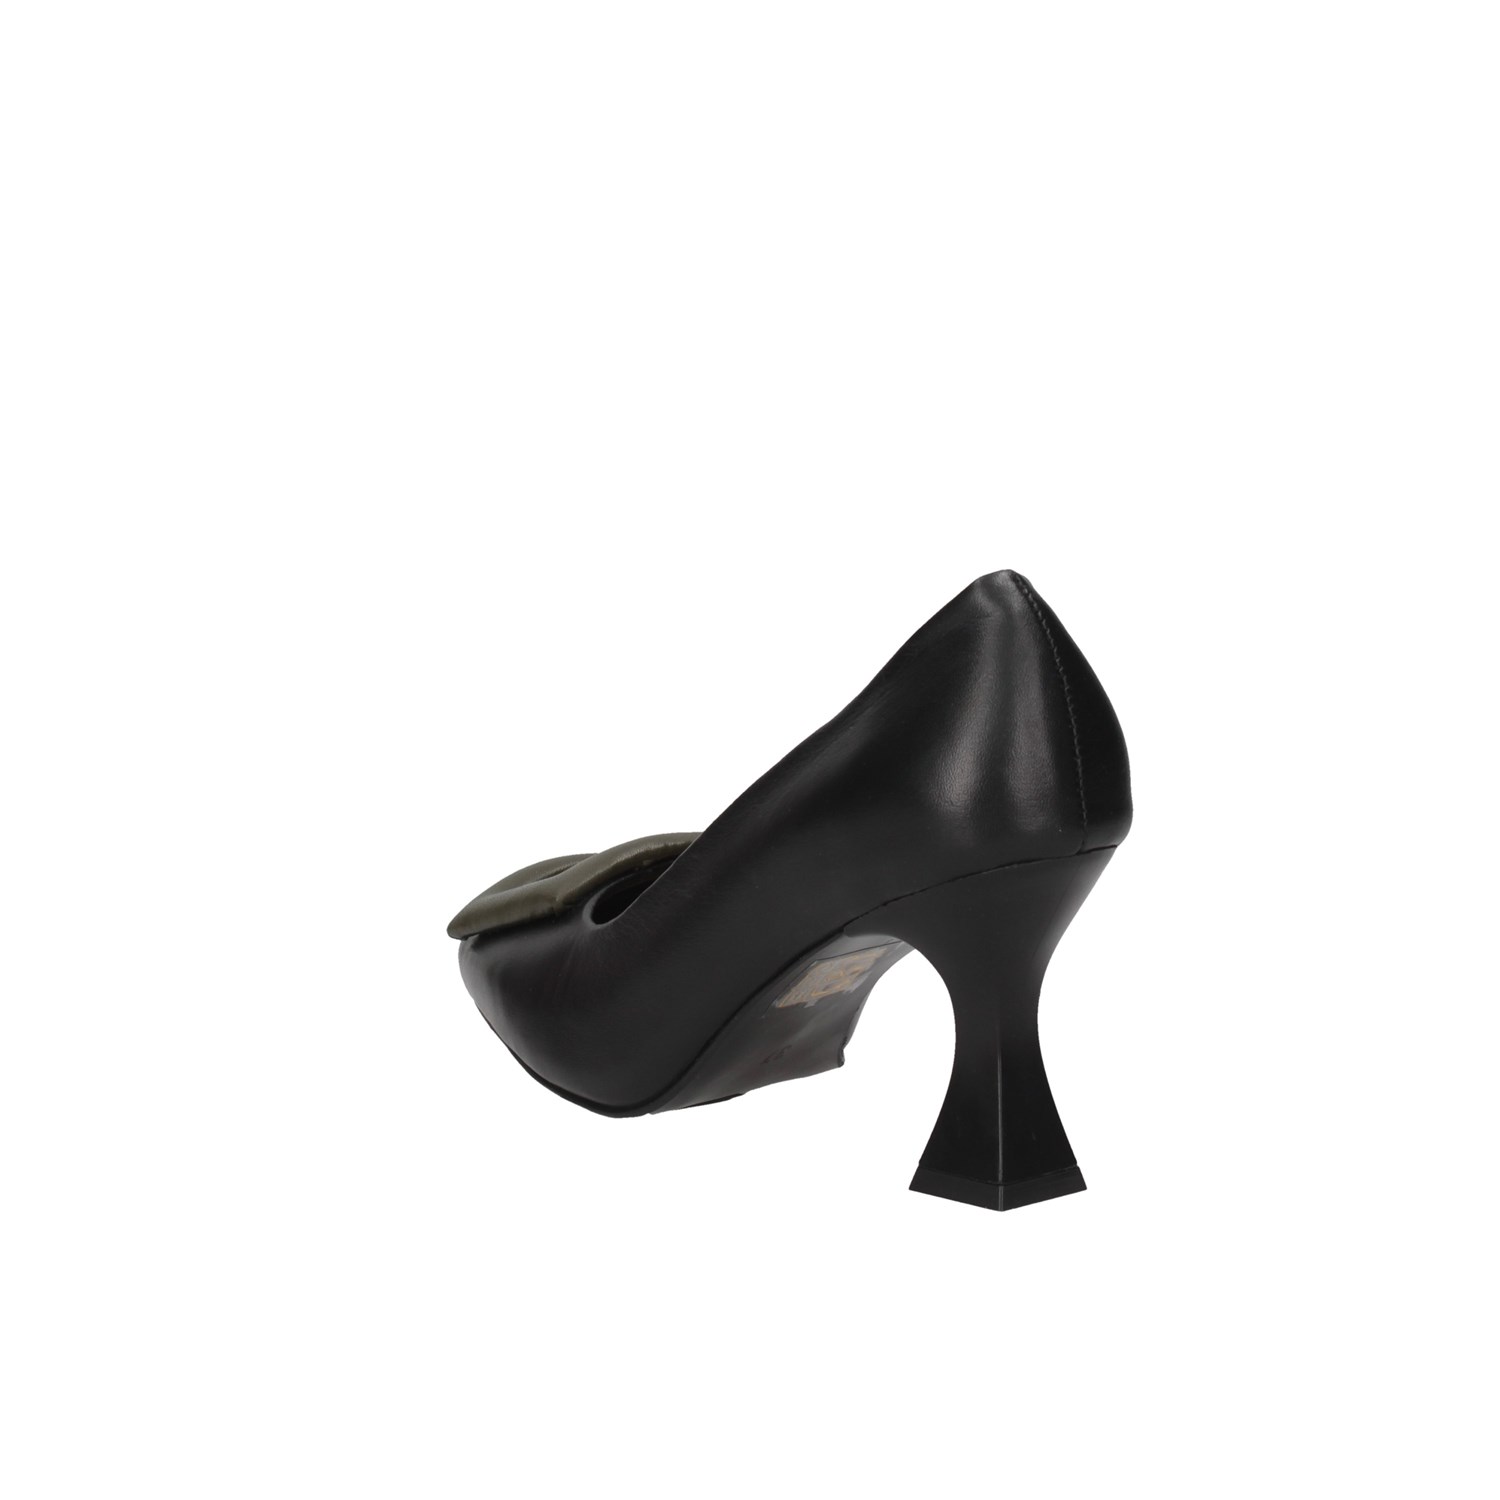 HERSUADE W2253 Black Shoes Woman 